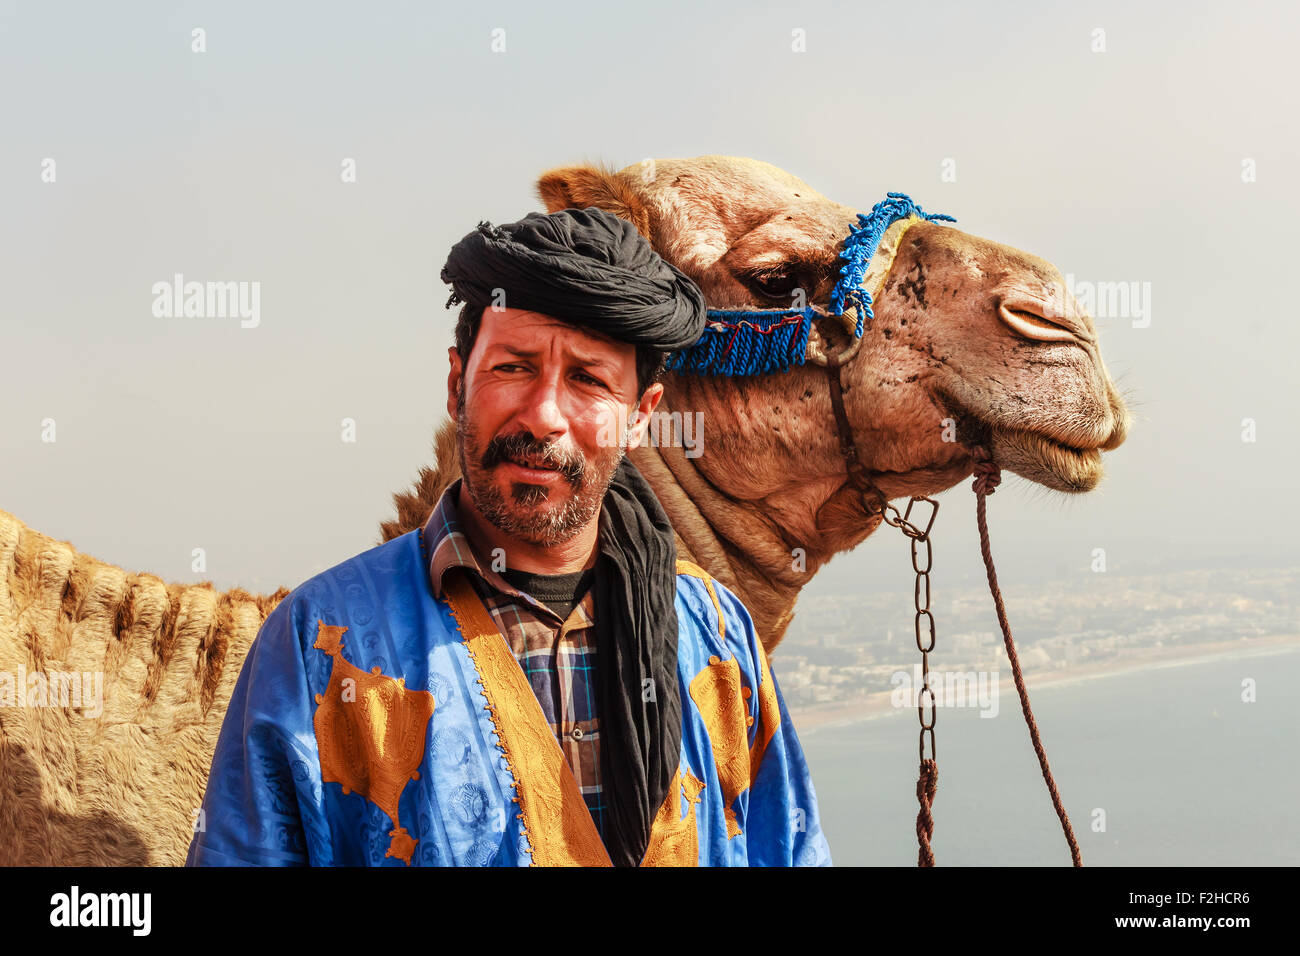 Camel driver with his camel Stock Photo